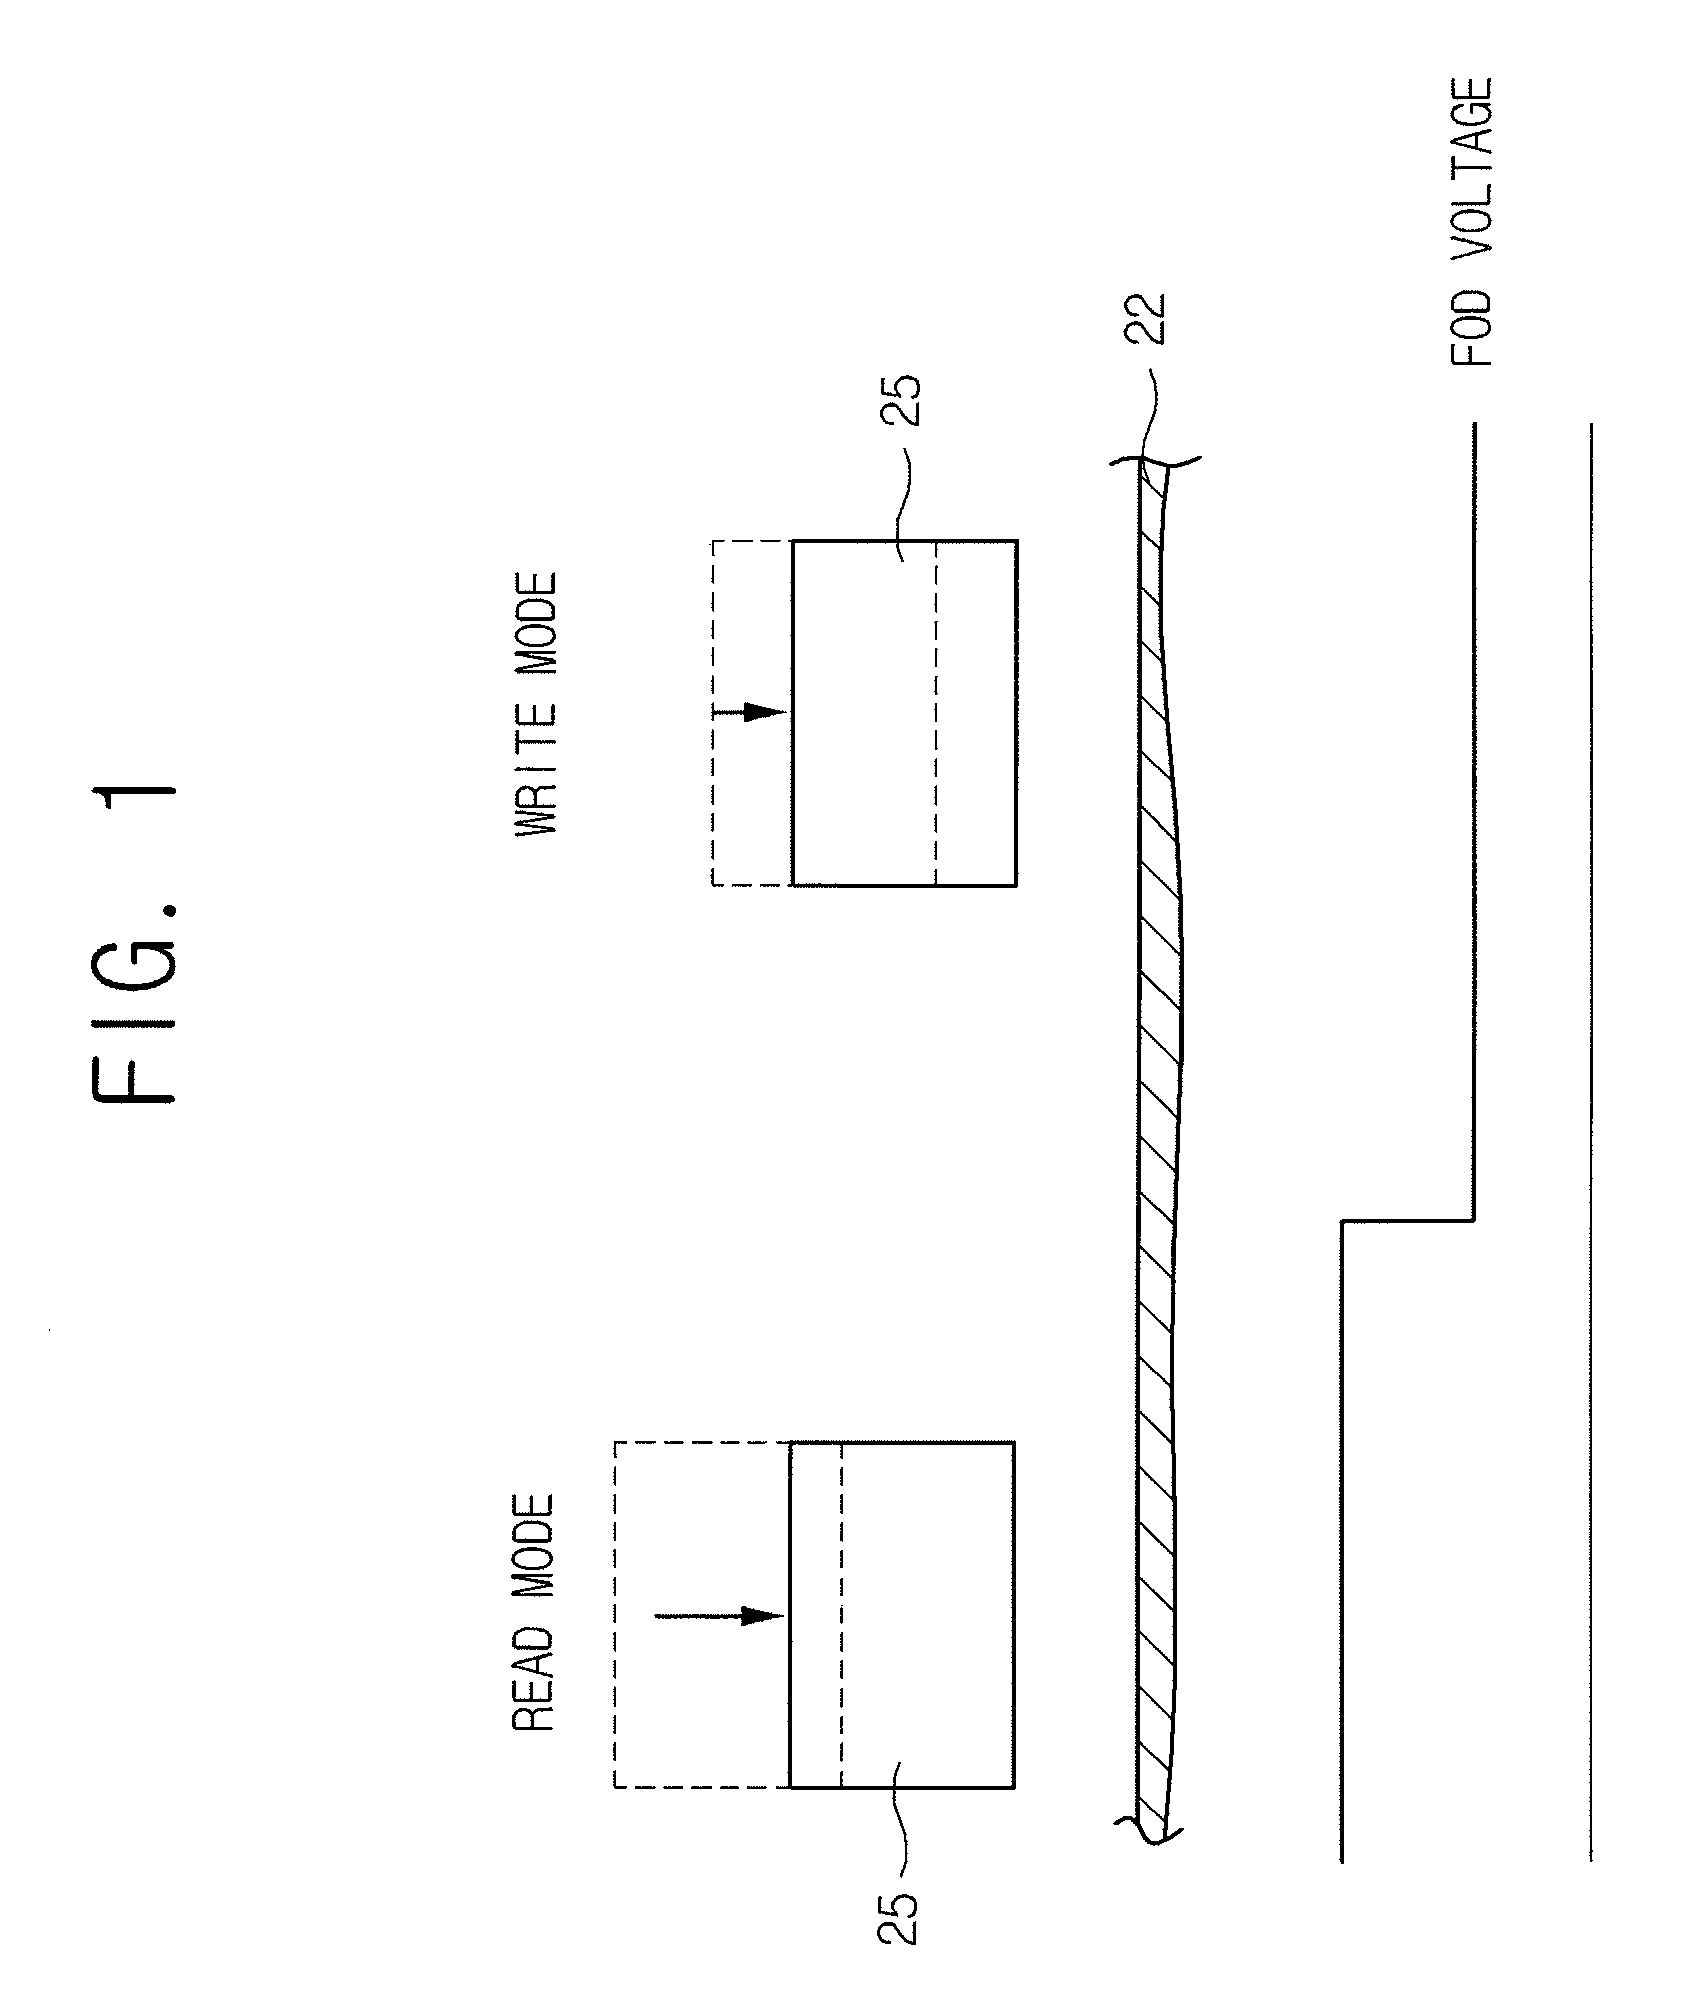 Hard disk drive apparatus, method to control flying on demand of hard disk drive apparatus using thermal asperity signal, and recording media for computer program thereof